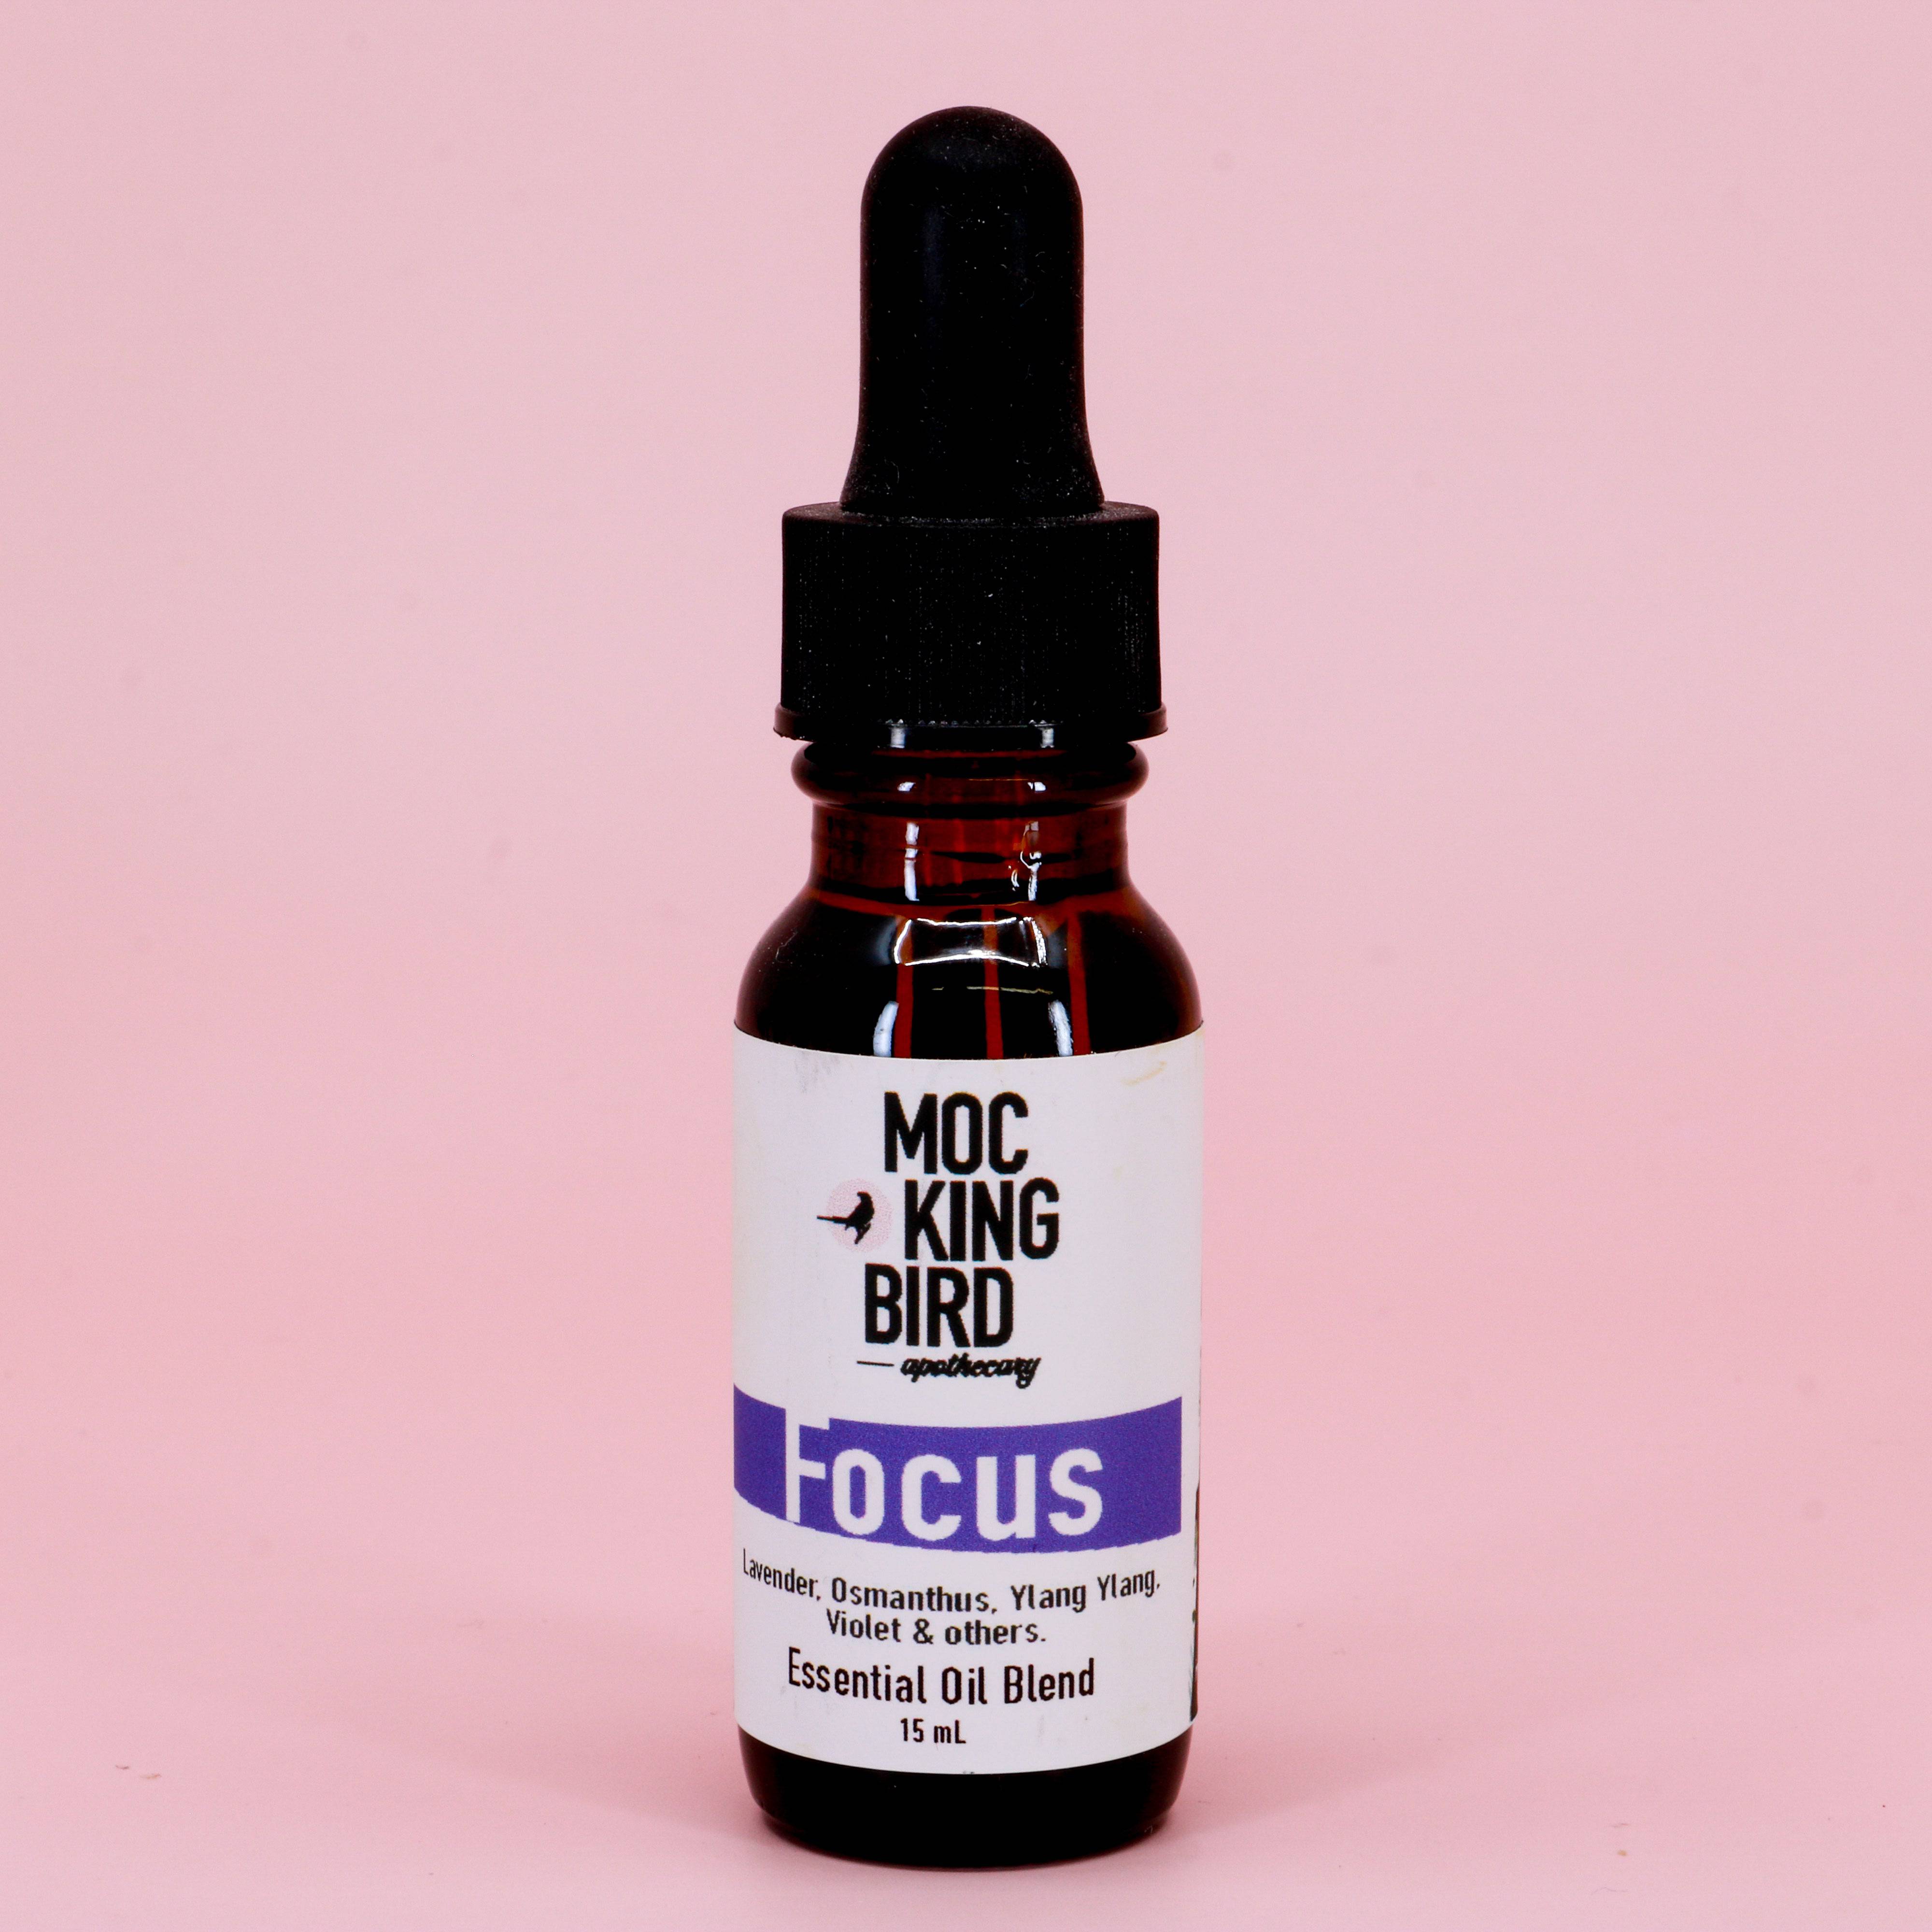 Focus Essential Oil Blend - The Mockingbird Apothecary & General Store